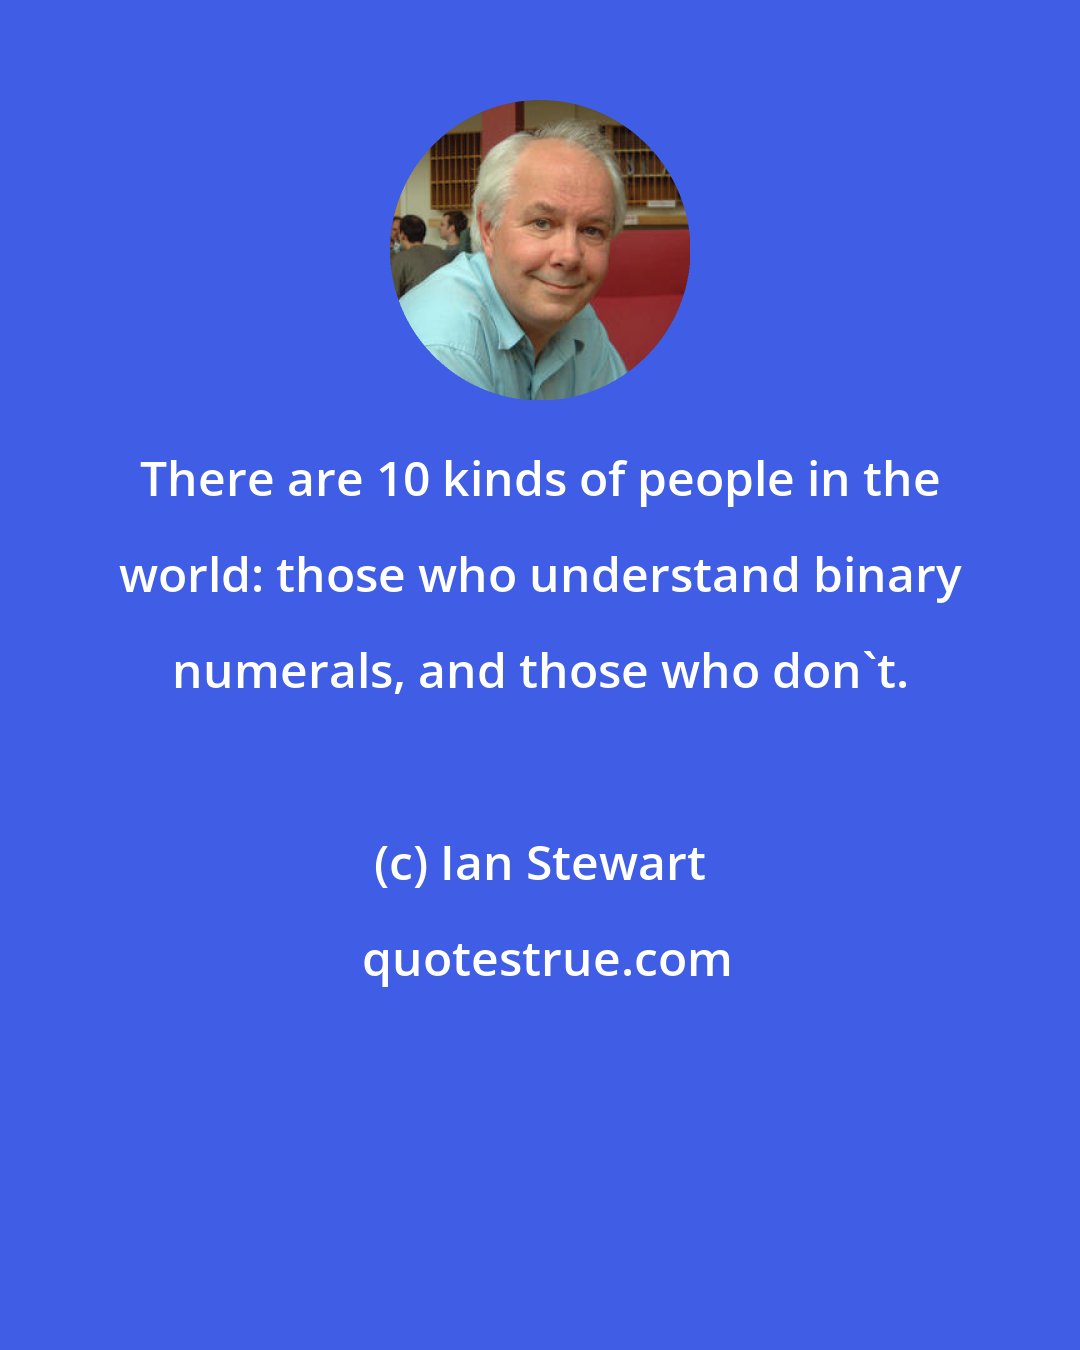 Ian Stewart: There are 10 kinds of people in the world: those who understand binary numerals, and those who don't.